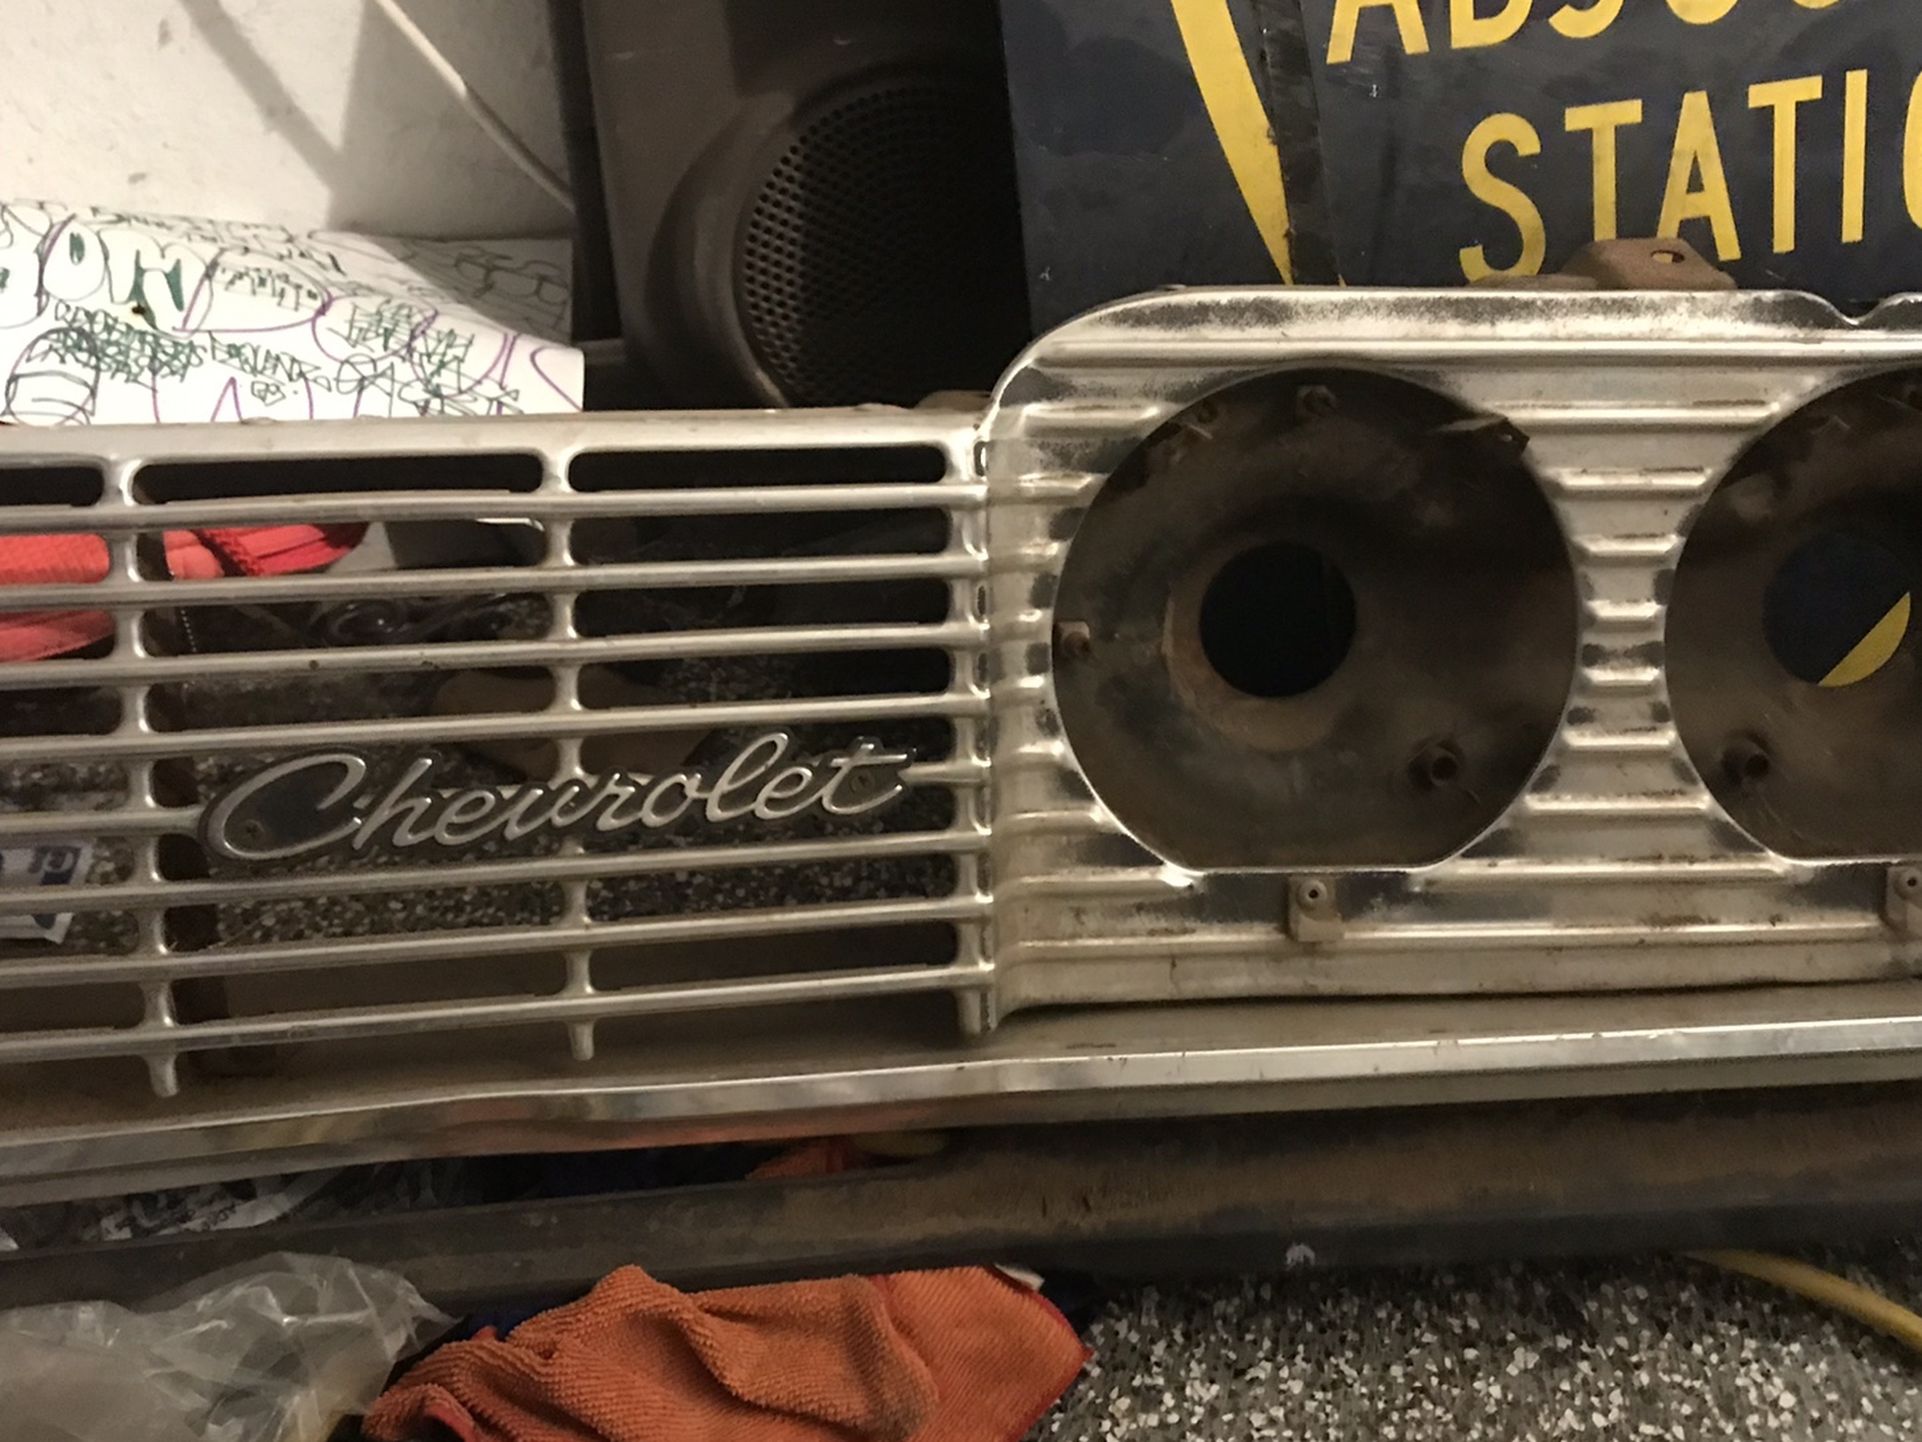 1964 Chevy Impala Grill With Support